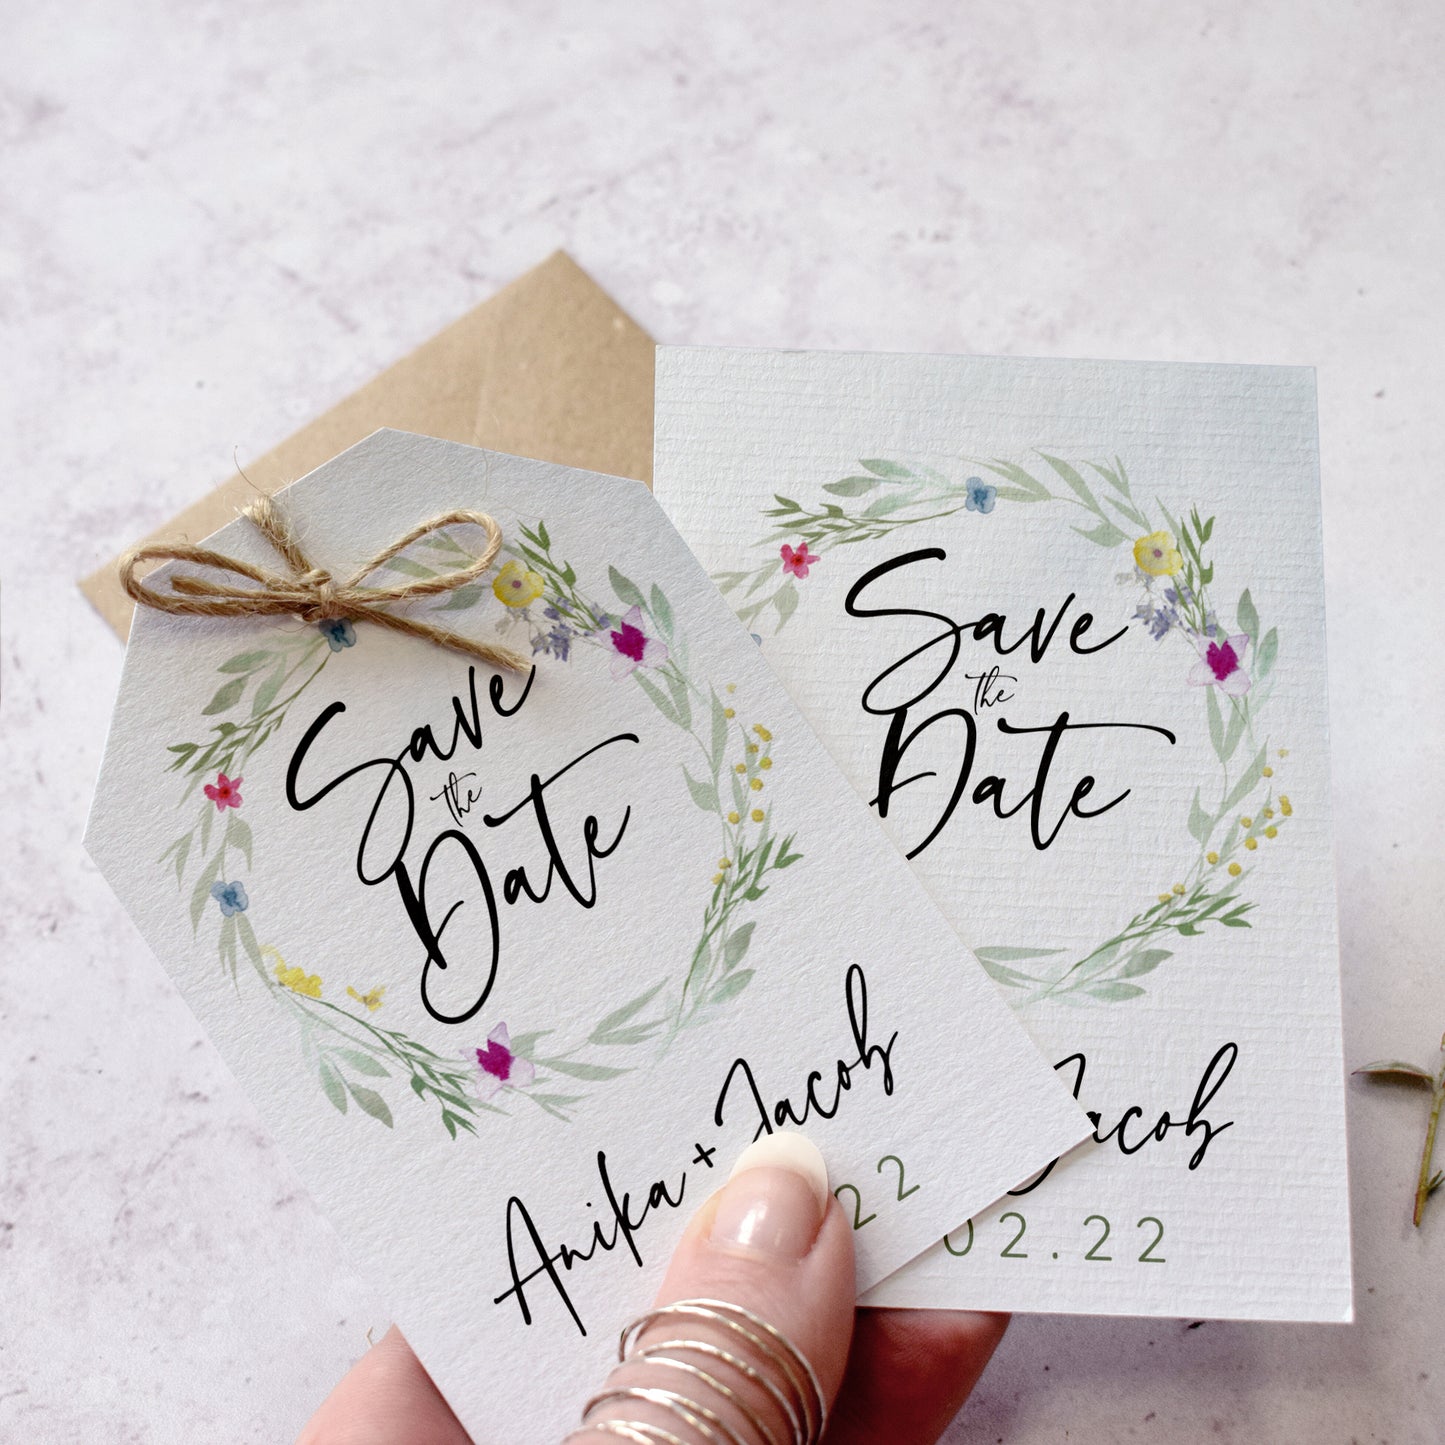 'Flower Press Wreath' wedding save the date cards